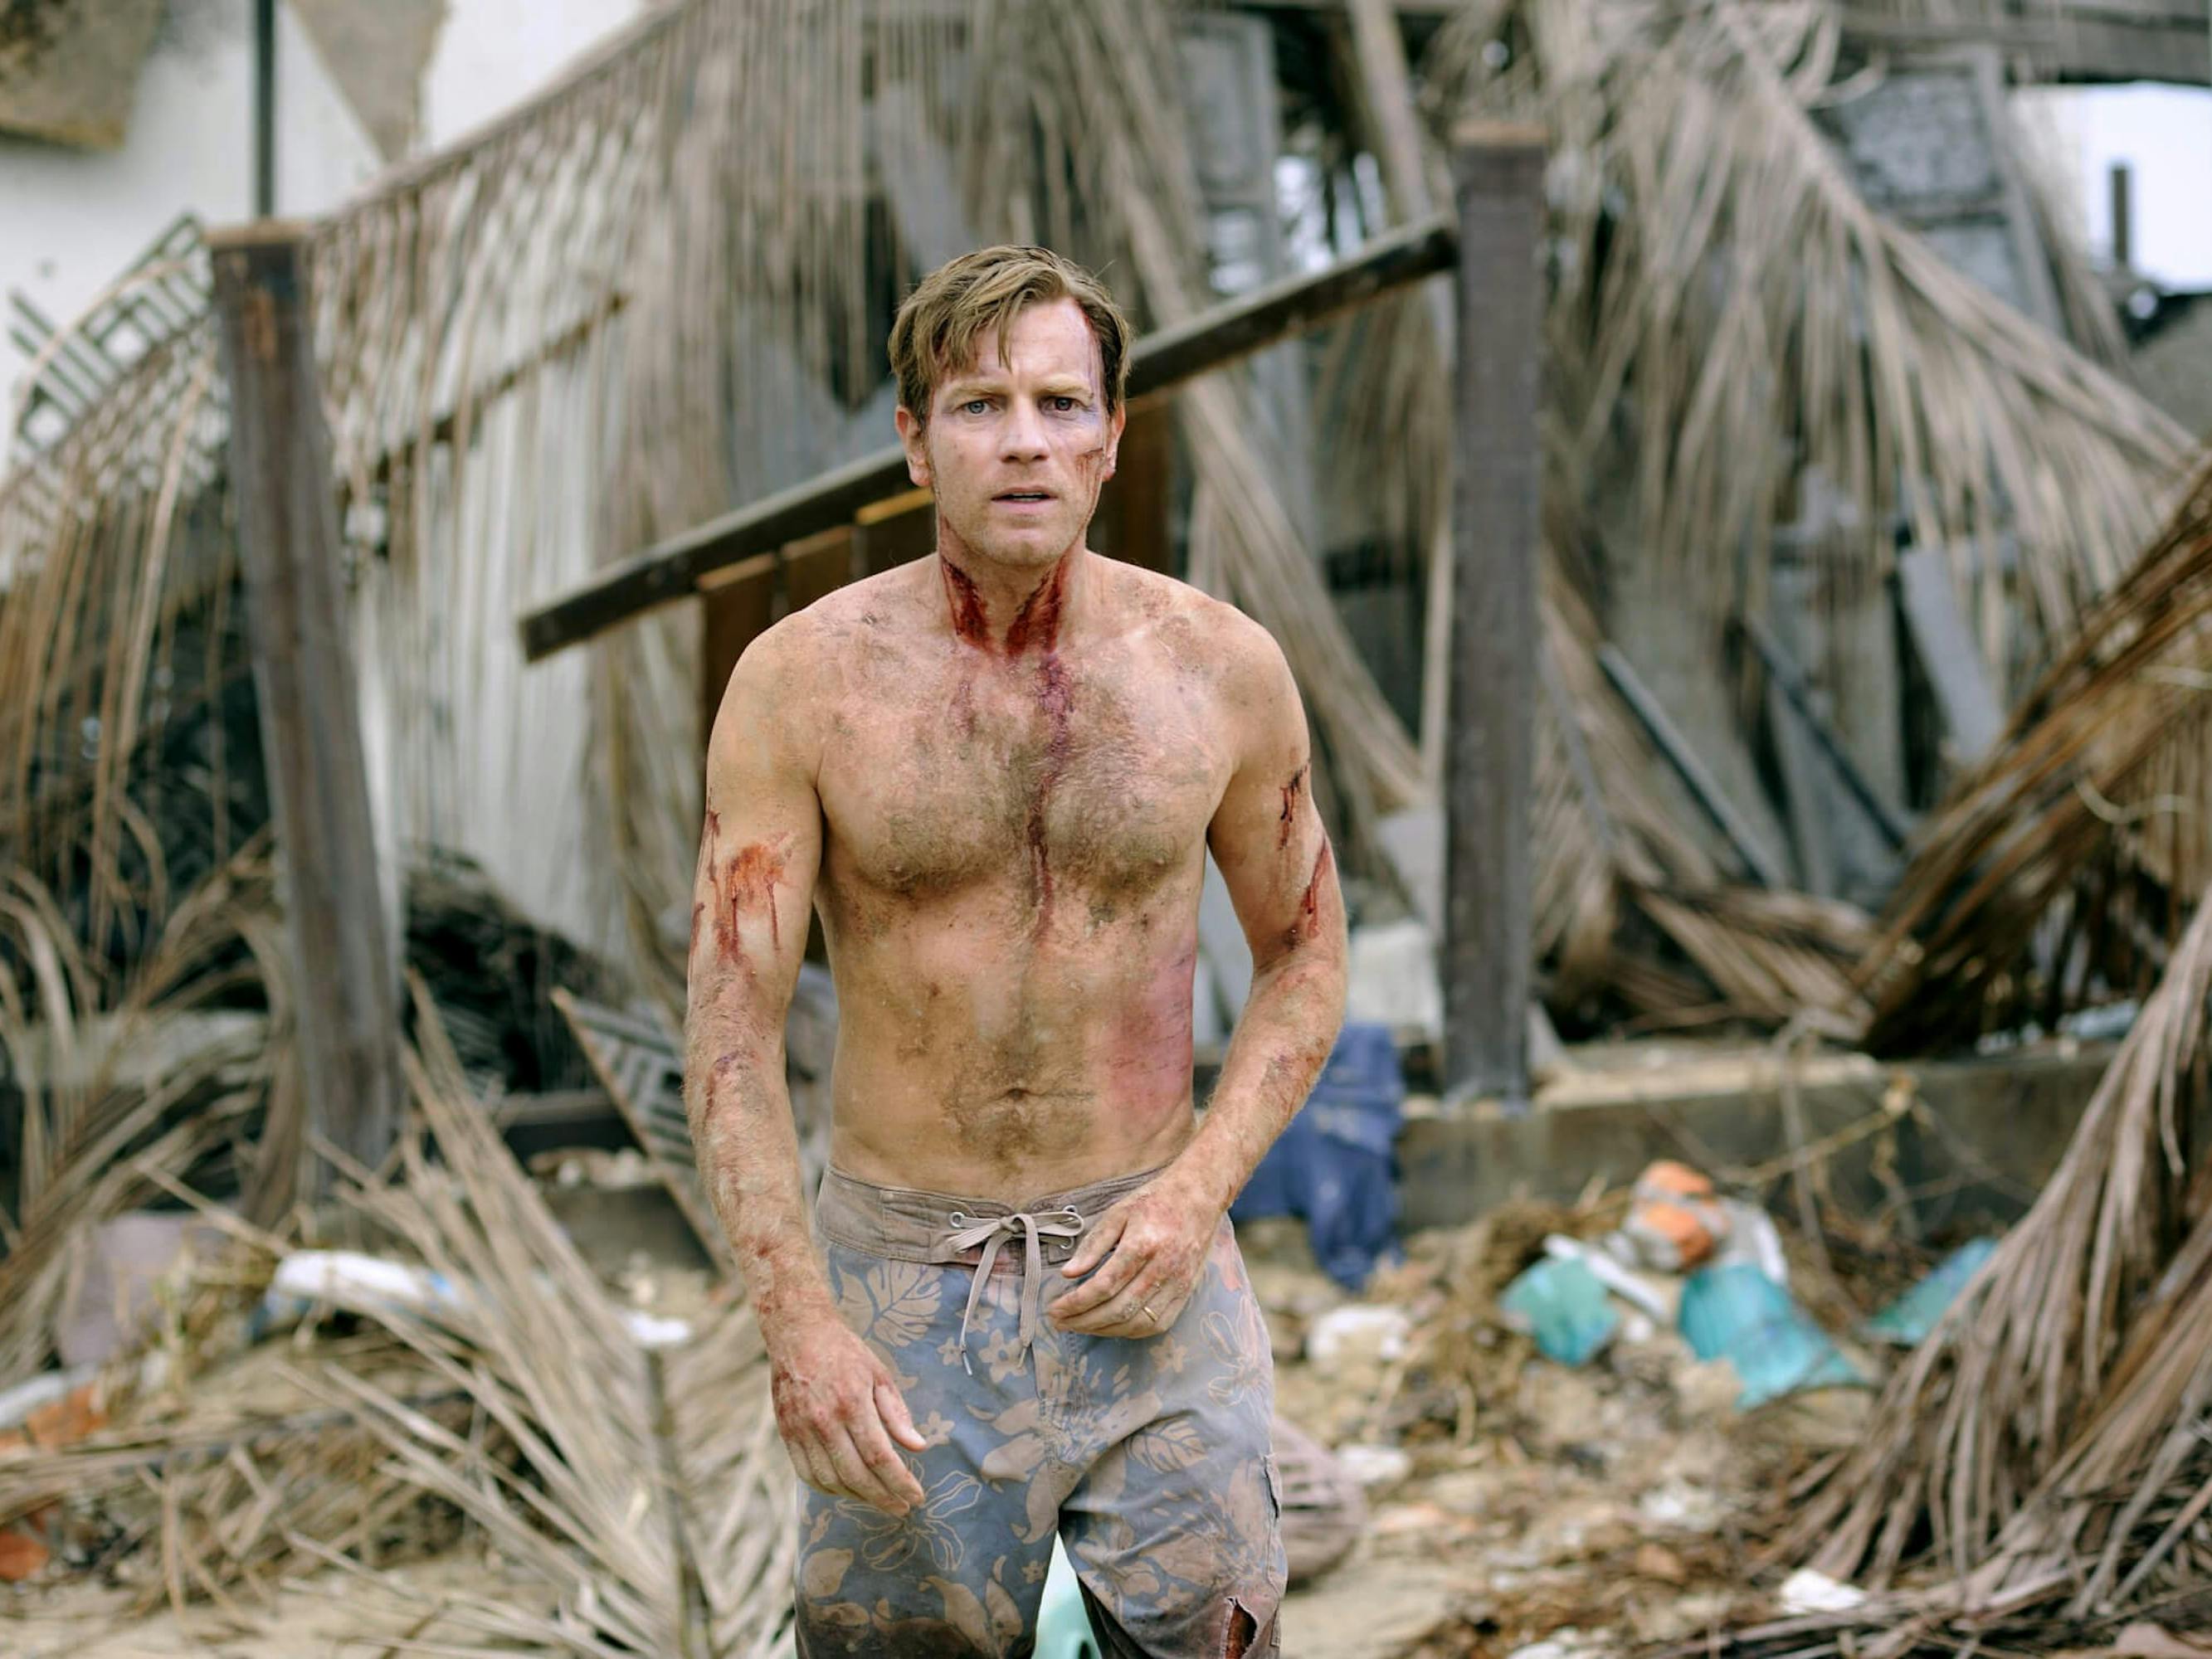 Henry (Ewan McGregor) in The Impossible wears a bathing suit, and his bare body is striped with blood and dirt. Dead palm fronds scatter the barren scene.